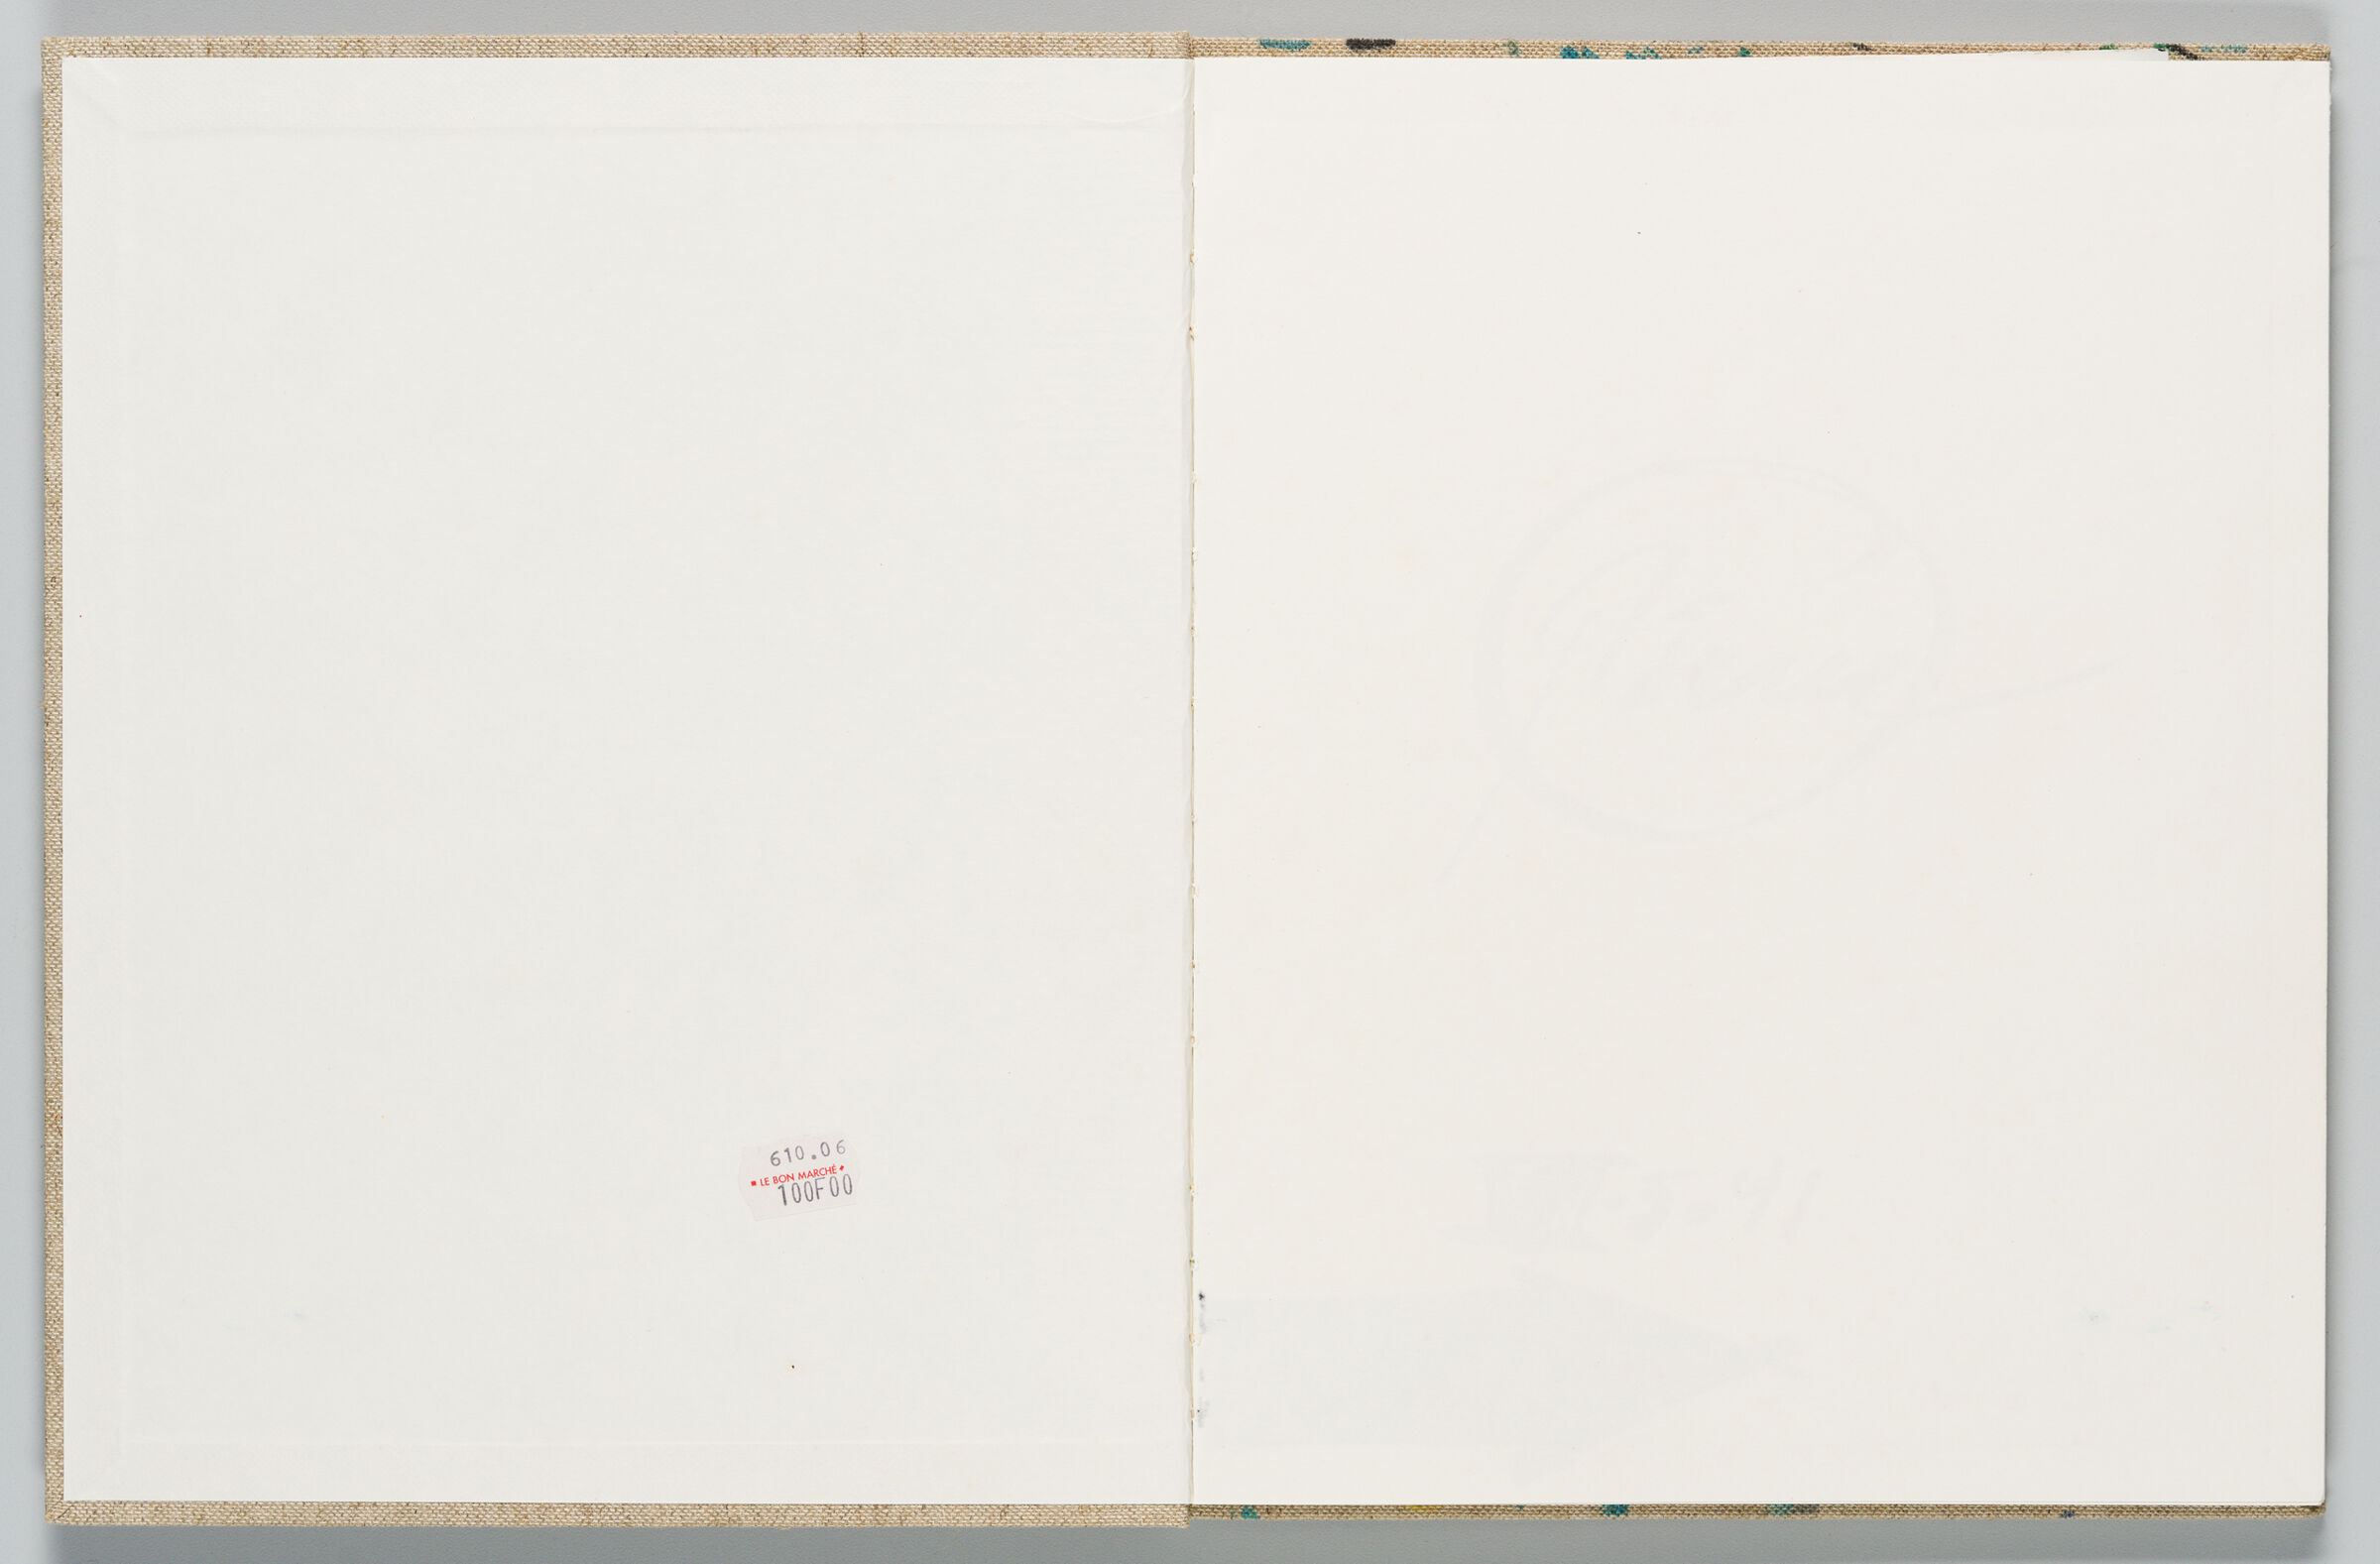 Untitled (Front Endpaper With Price Sticker, Left Page); Untitled (Blank, Right Page)